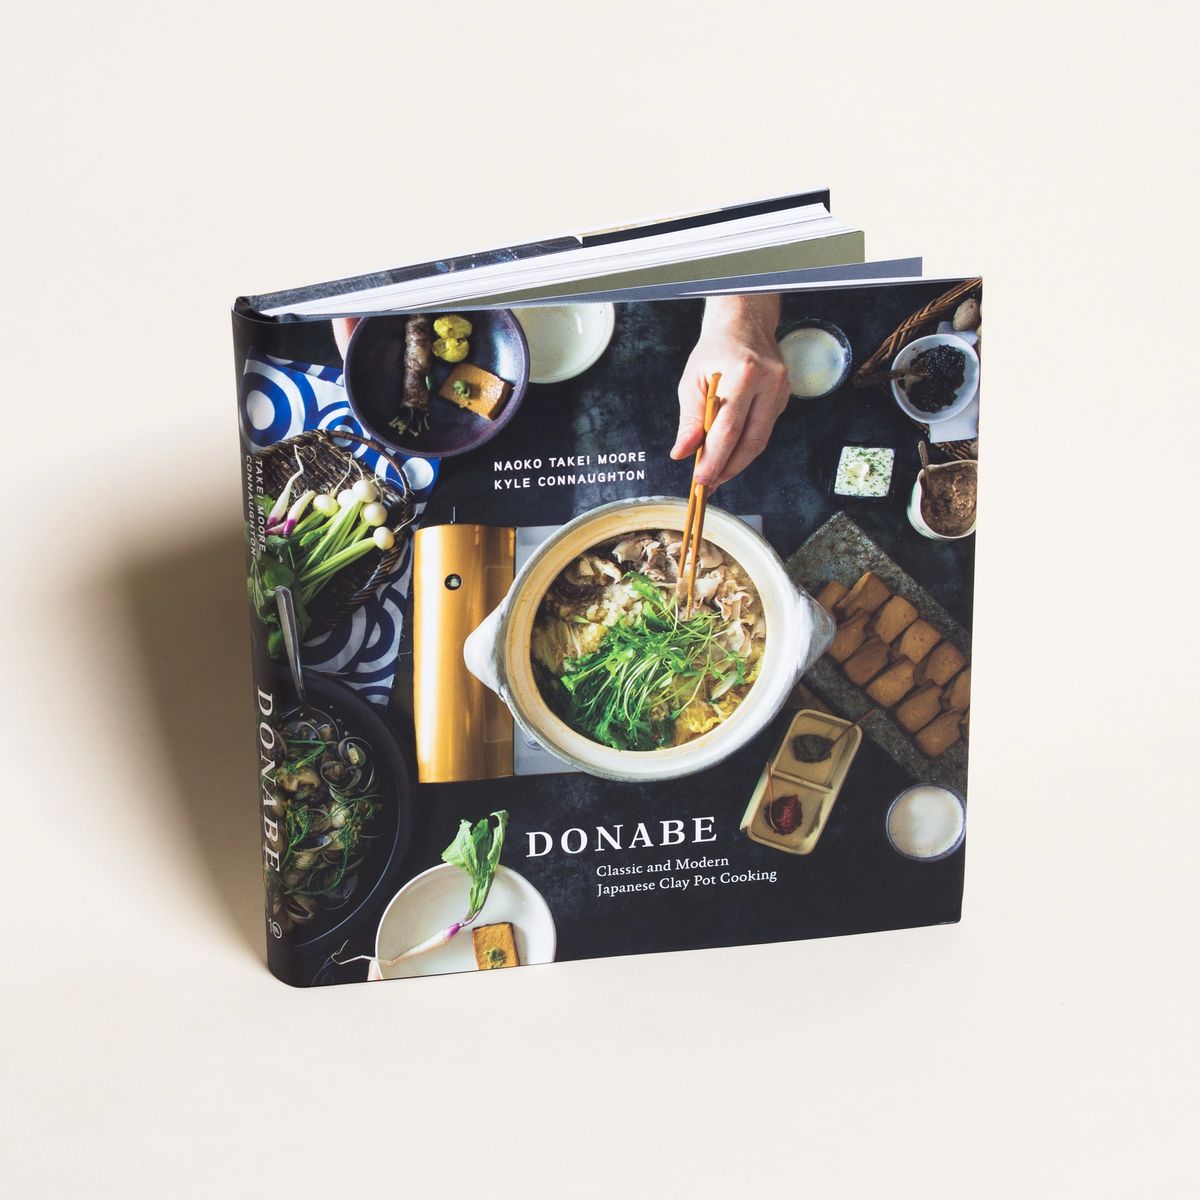 A book shown at a slight angle and the word "Donabe," and a clay pot filled with soup and greens surrounded by bowls and ingredients, a hand reaching in with chopsticks